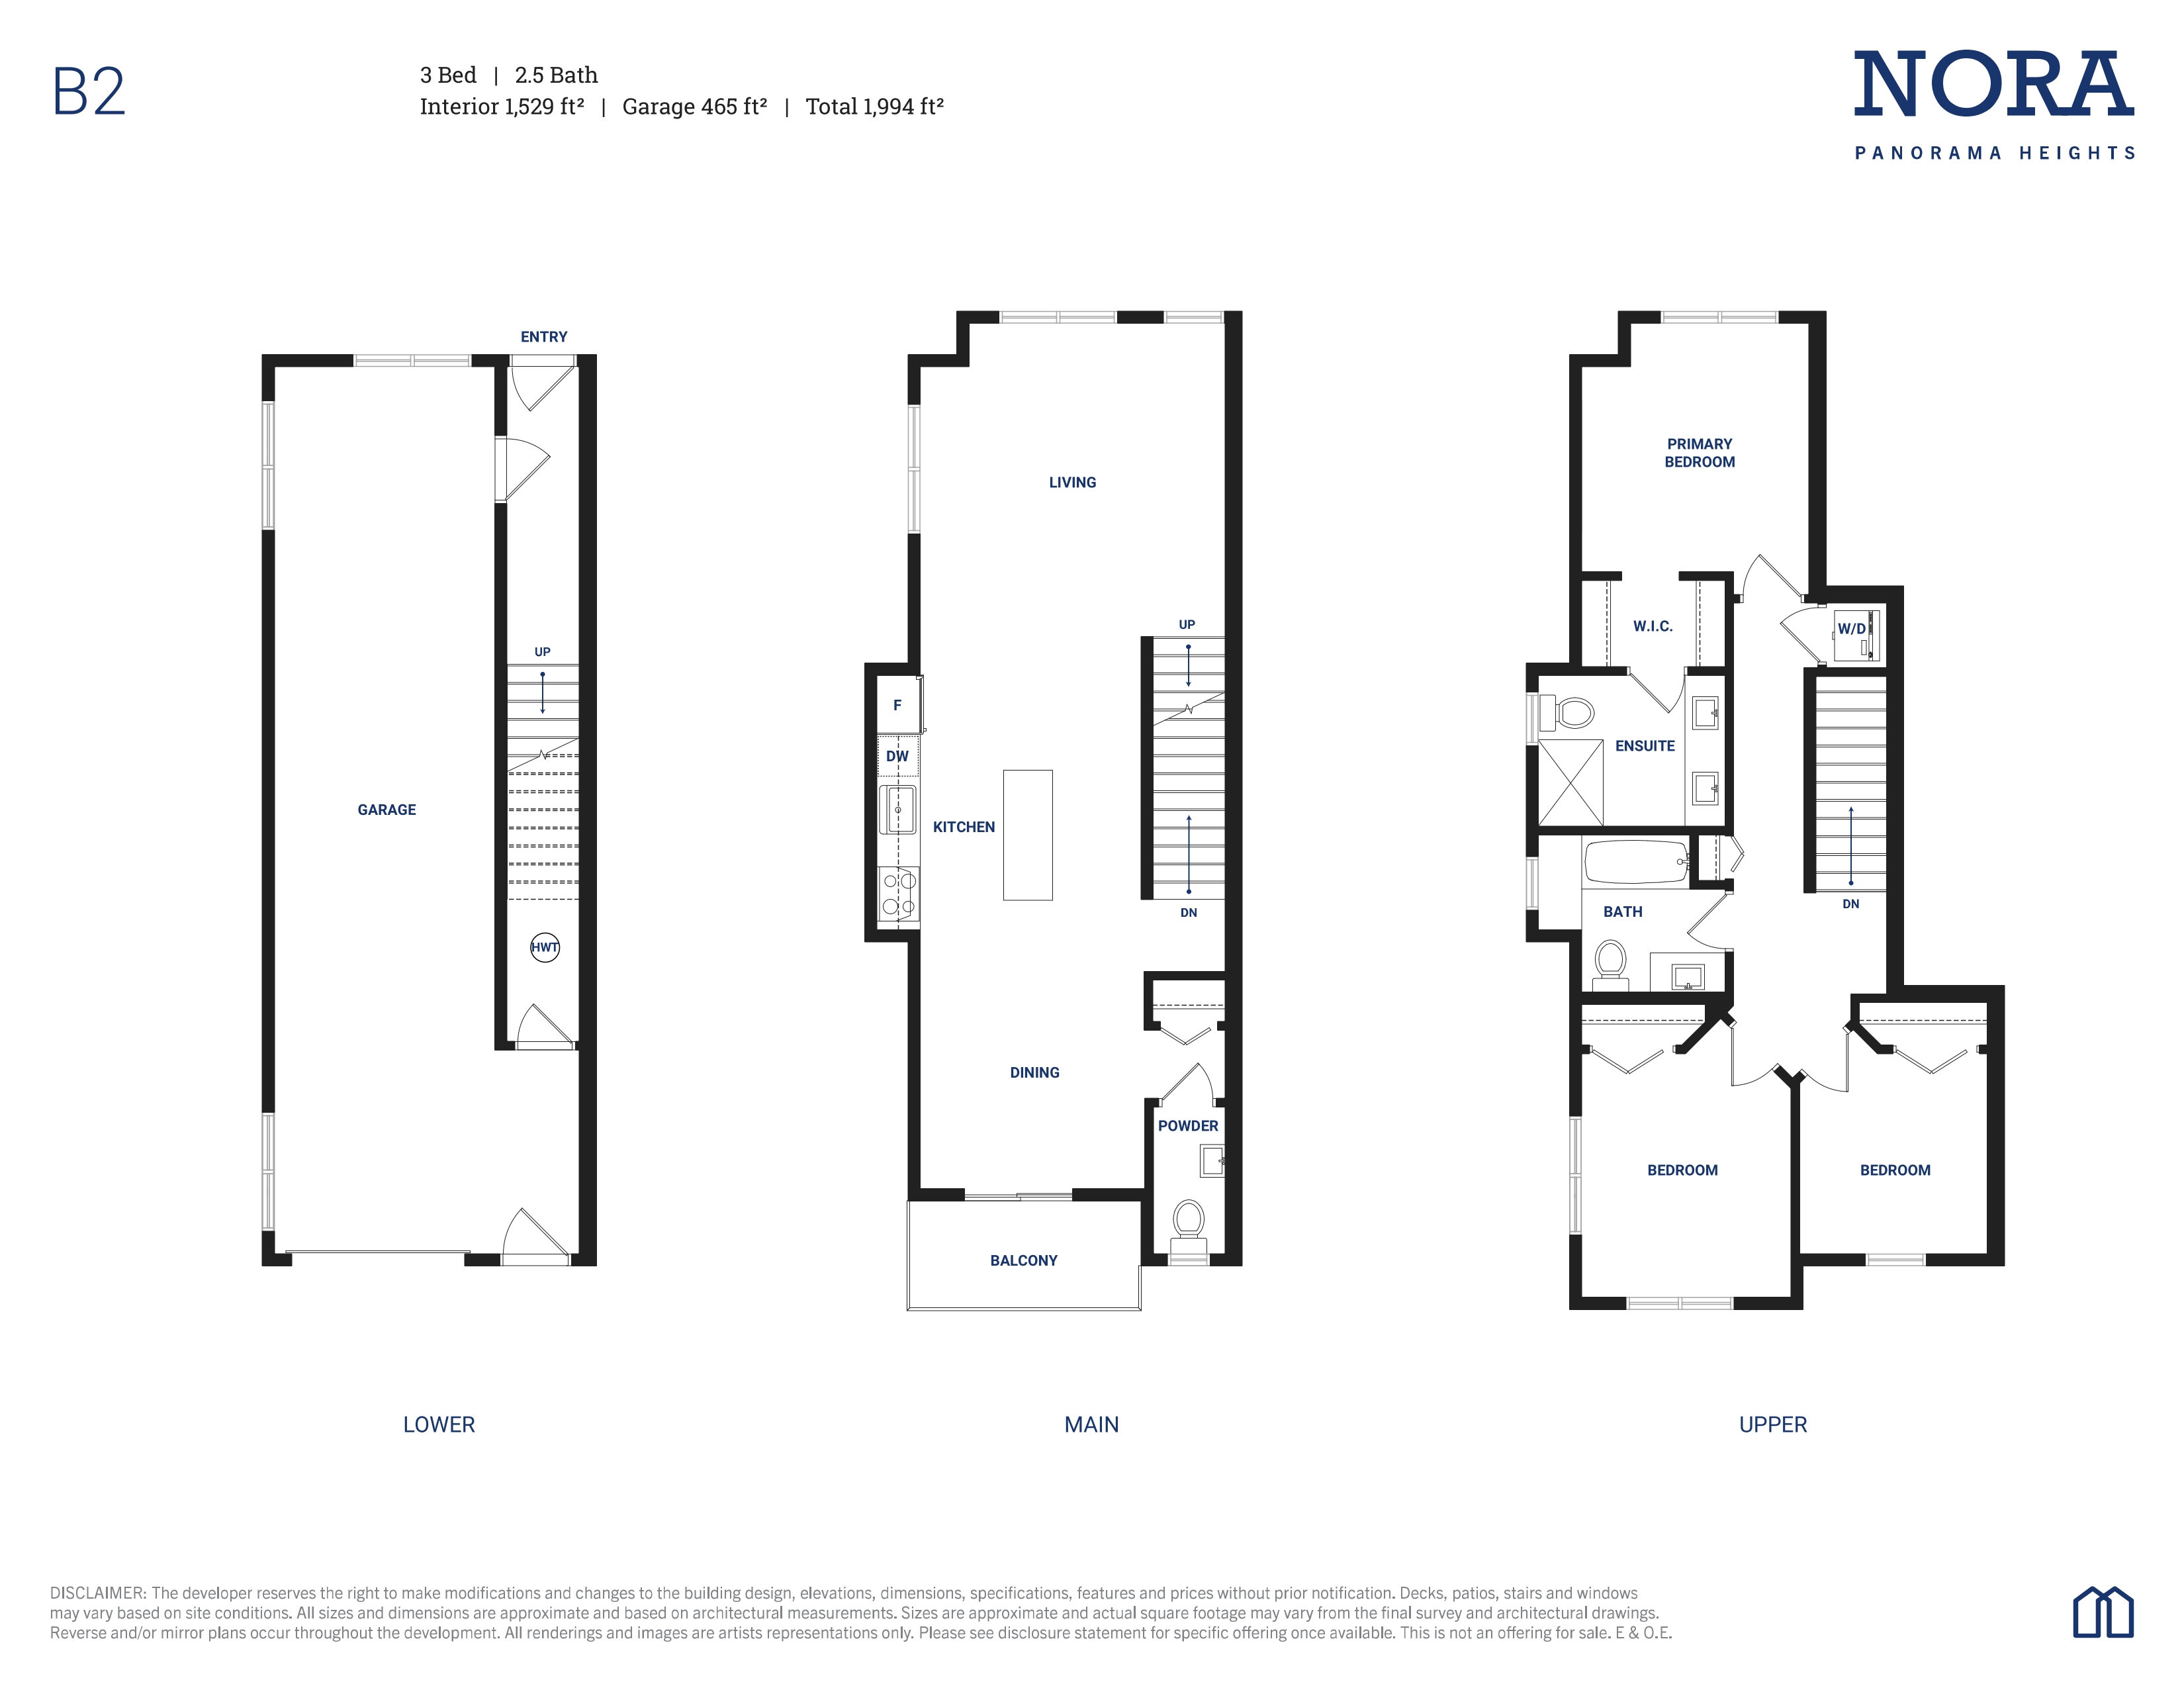 B2 Floor Plan of Nora Towns with undefined beds